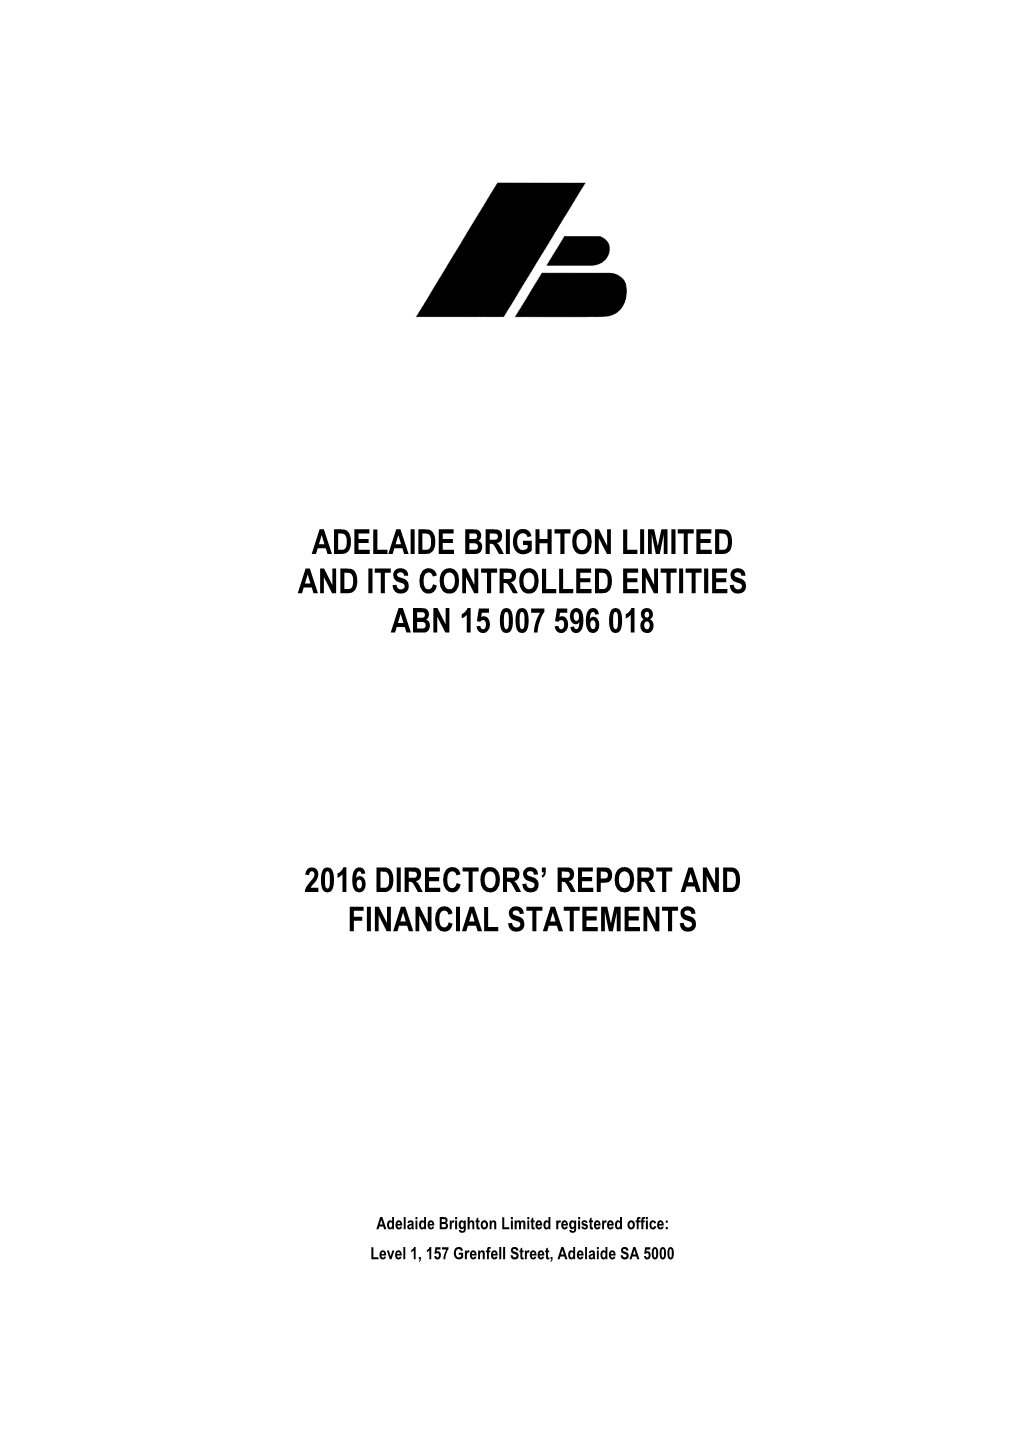 Adelaide Brighton Limited and Its Controlled Entities Abn 15 007 596 018